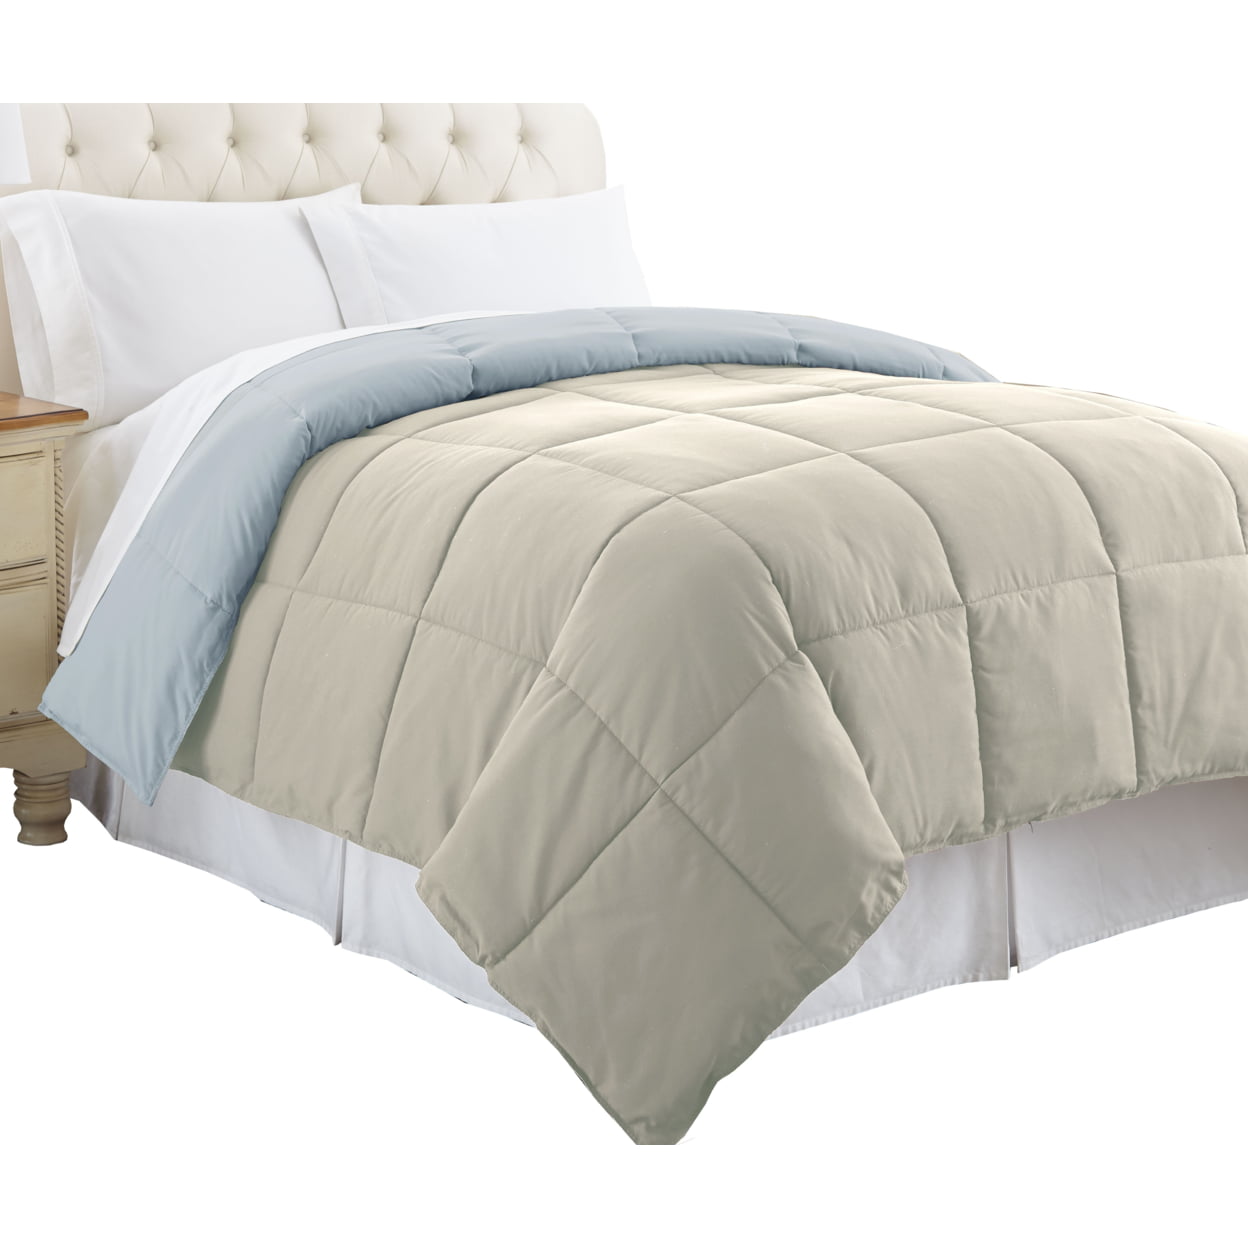 Bm46021 Genoa Twin Size Box Quilted Reversible Comforter, Gray & Blue